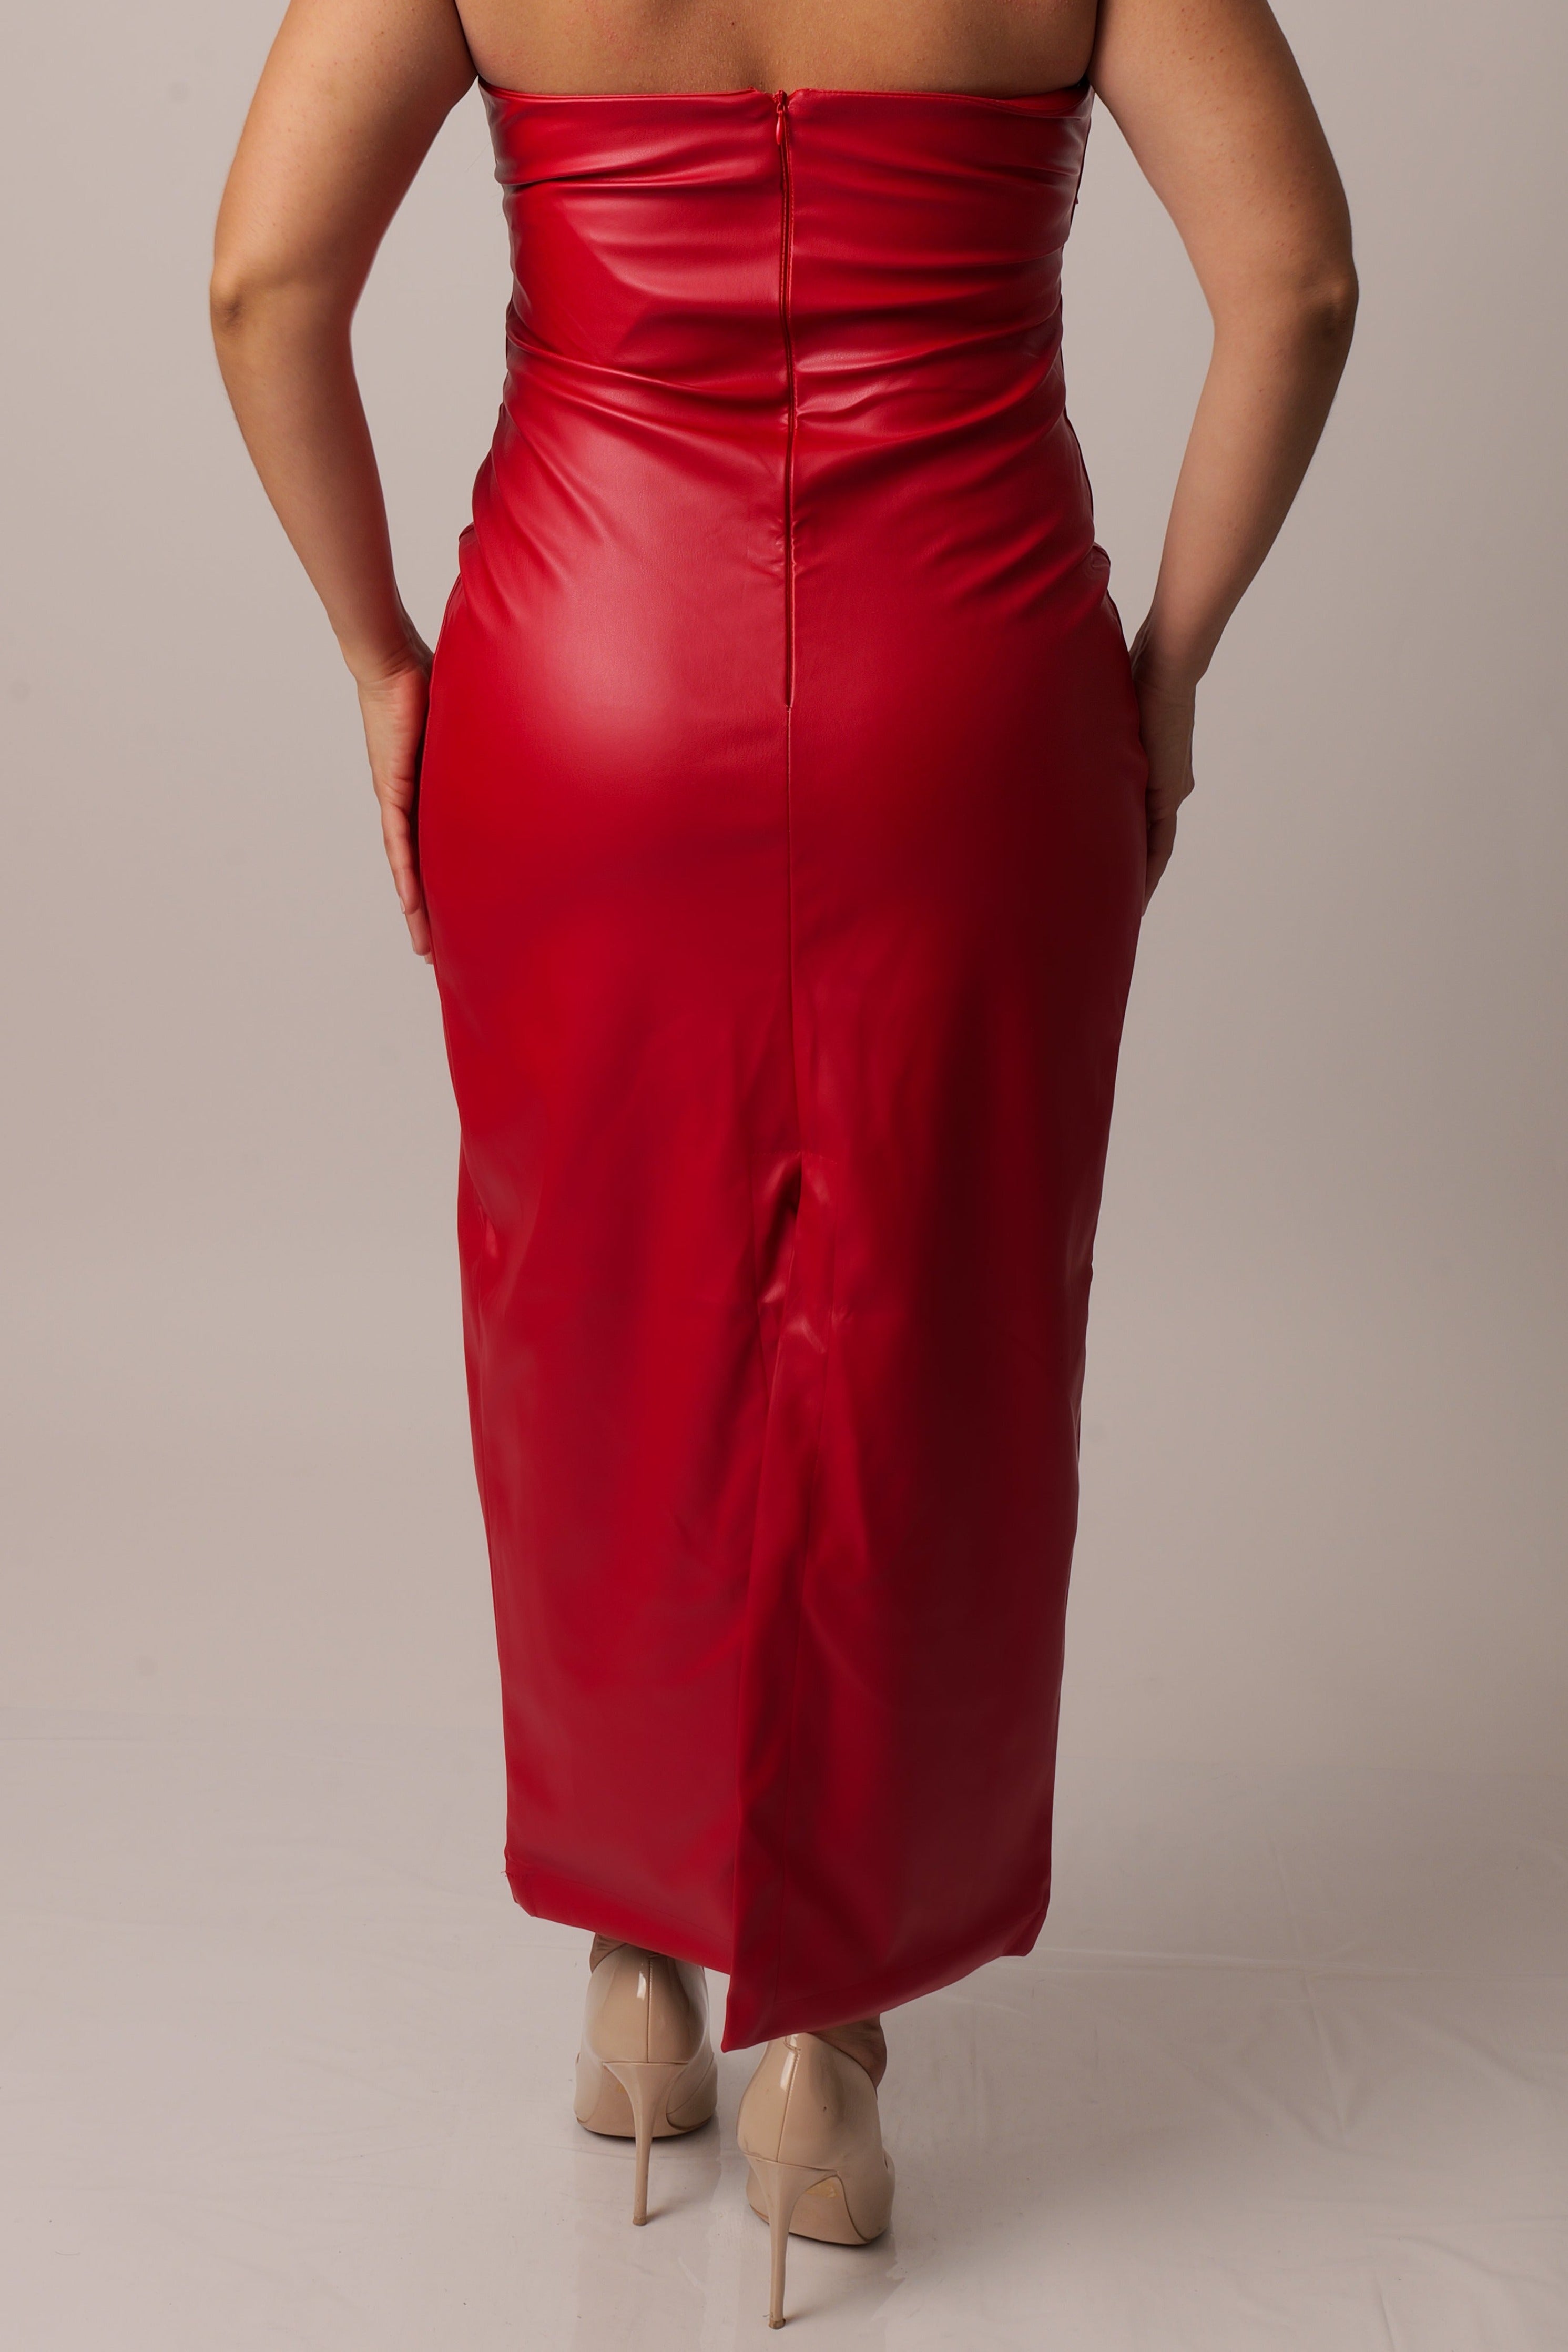 Faux leather red midi Dress